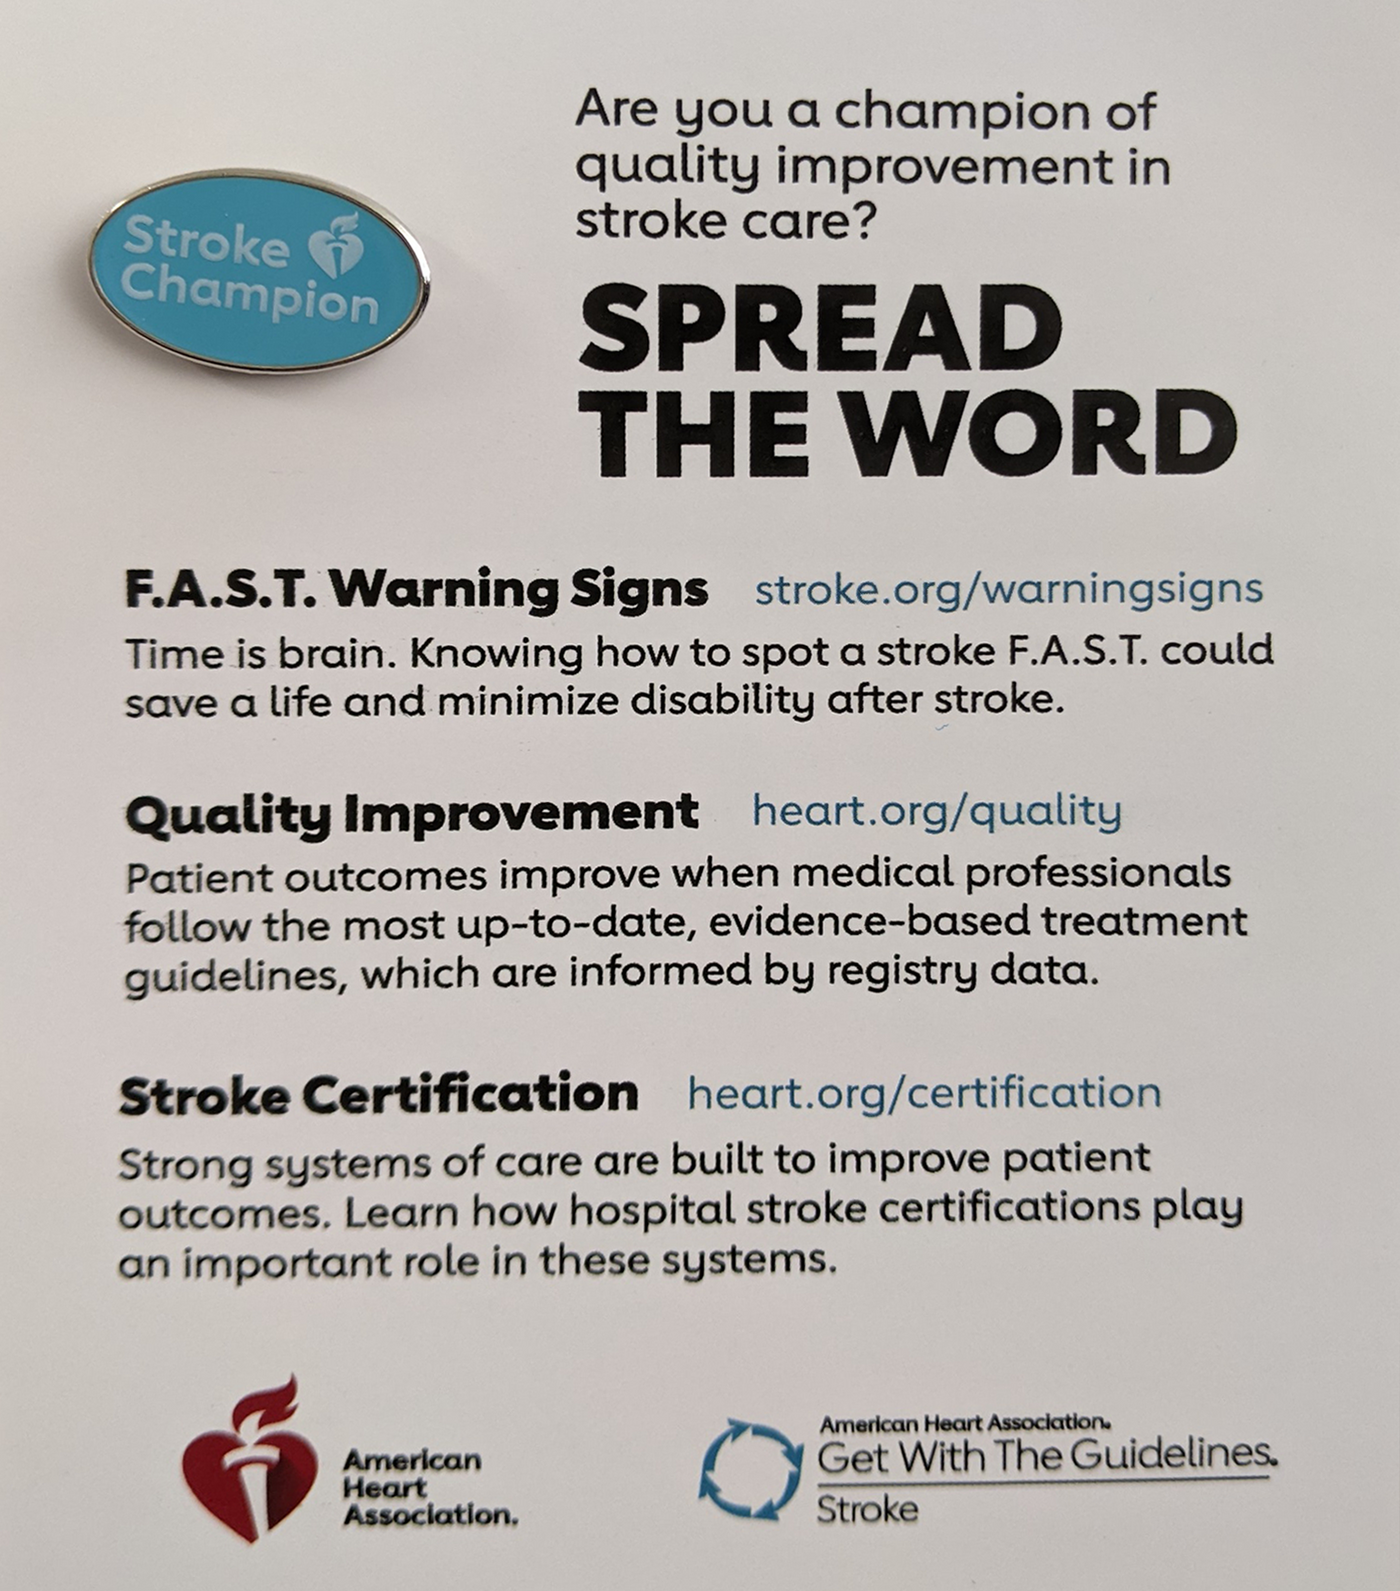 Stroke Champion Pin on backer card with messages to "Spread the Word" about F.A.S.T. warning signs, quality improvement and stroke certification